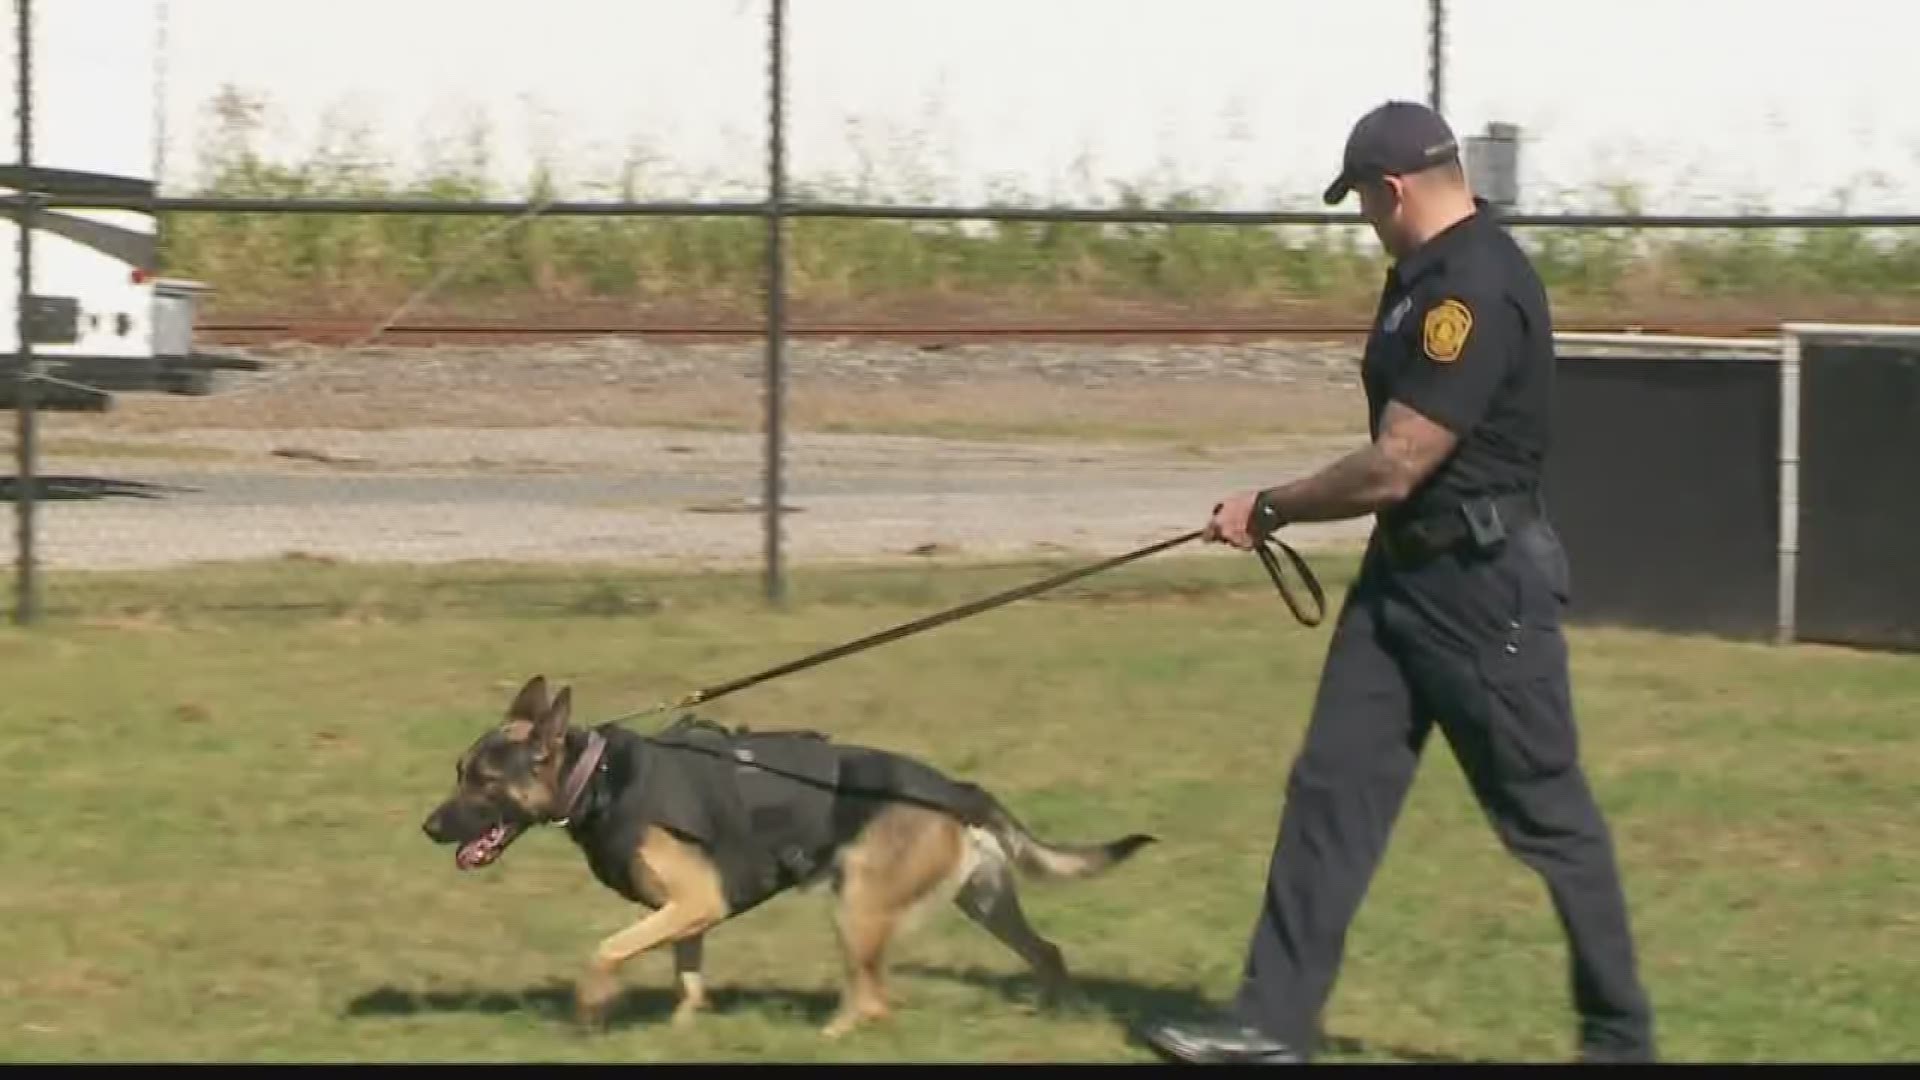 A huge donation is helping Norfolk Police outfit their K-9's with protective vests.